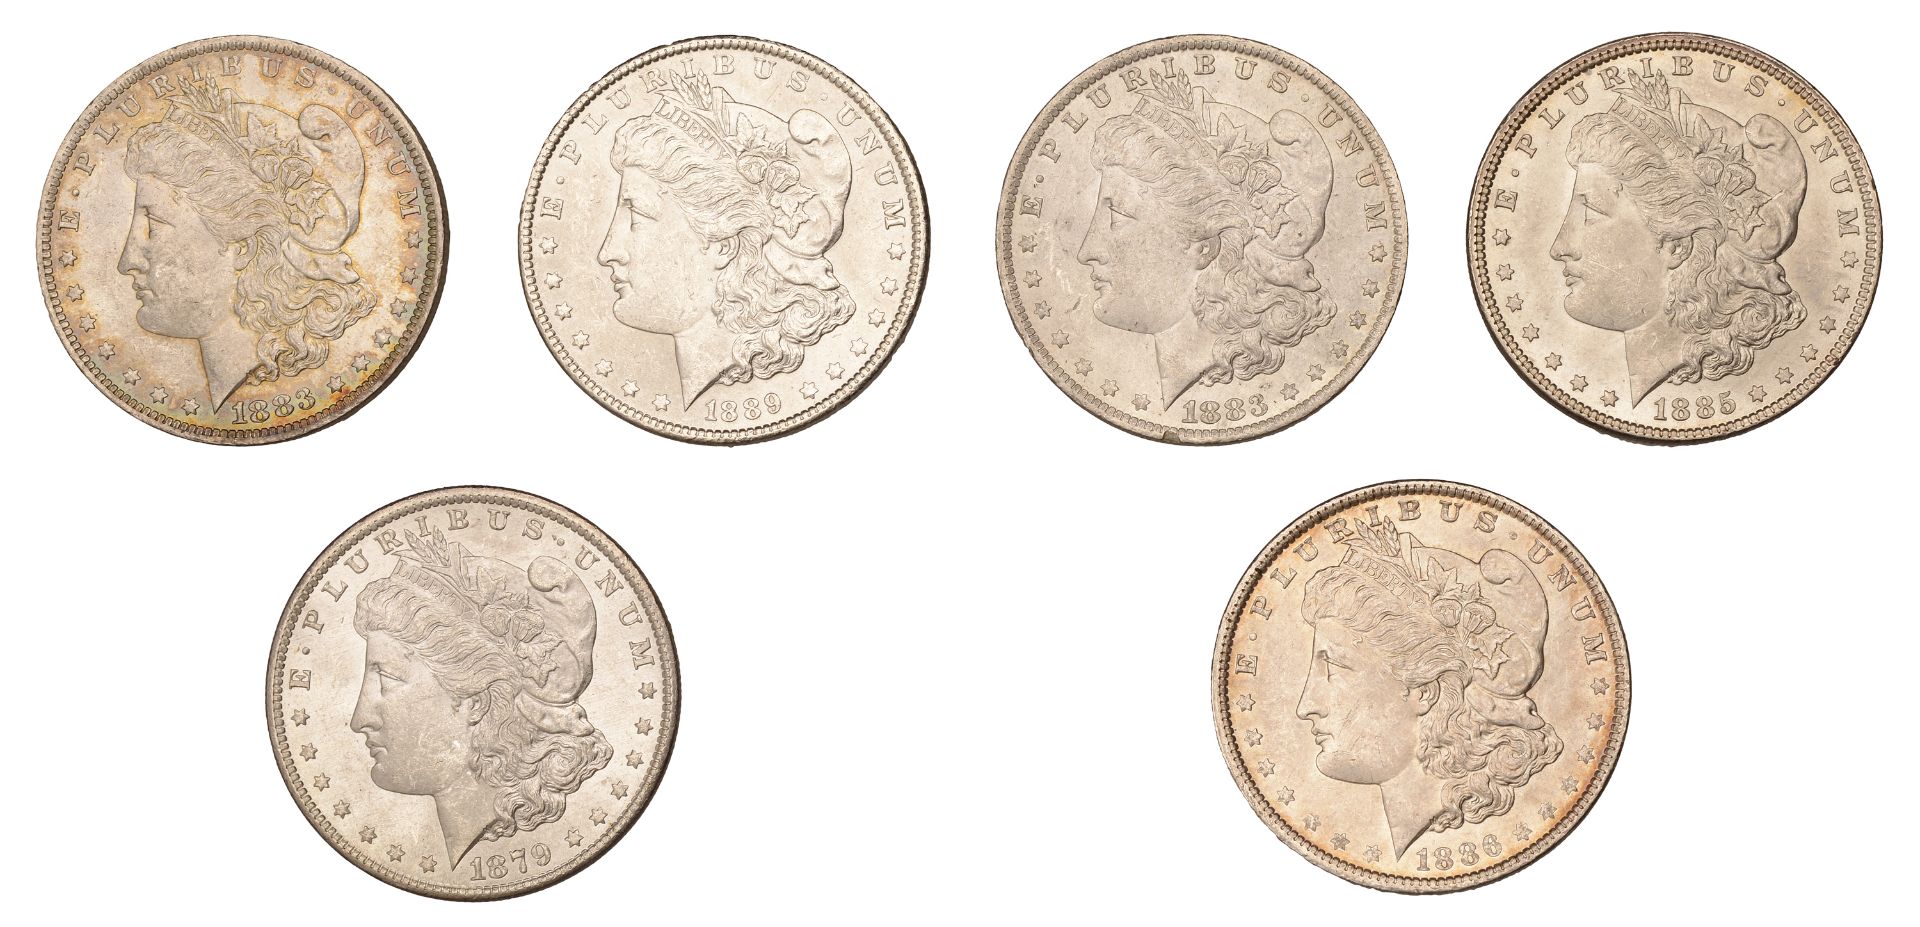 United States of America, Dollars (6), 1879s, 1883o (2), 1885, 1886, 1889 [6]. Extremely fin...